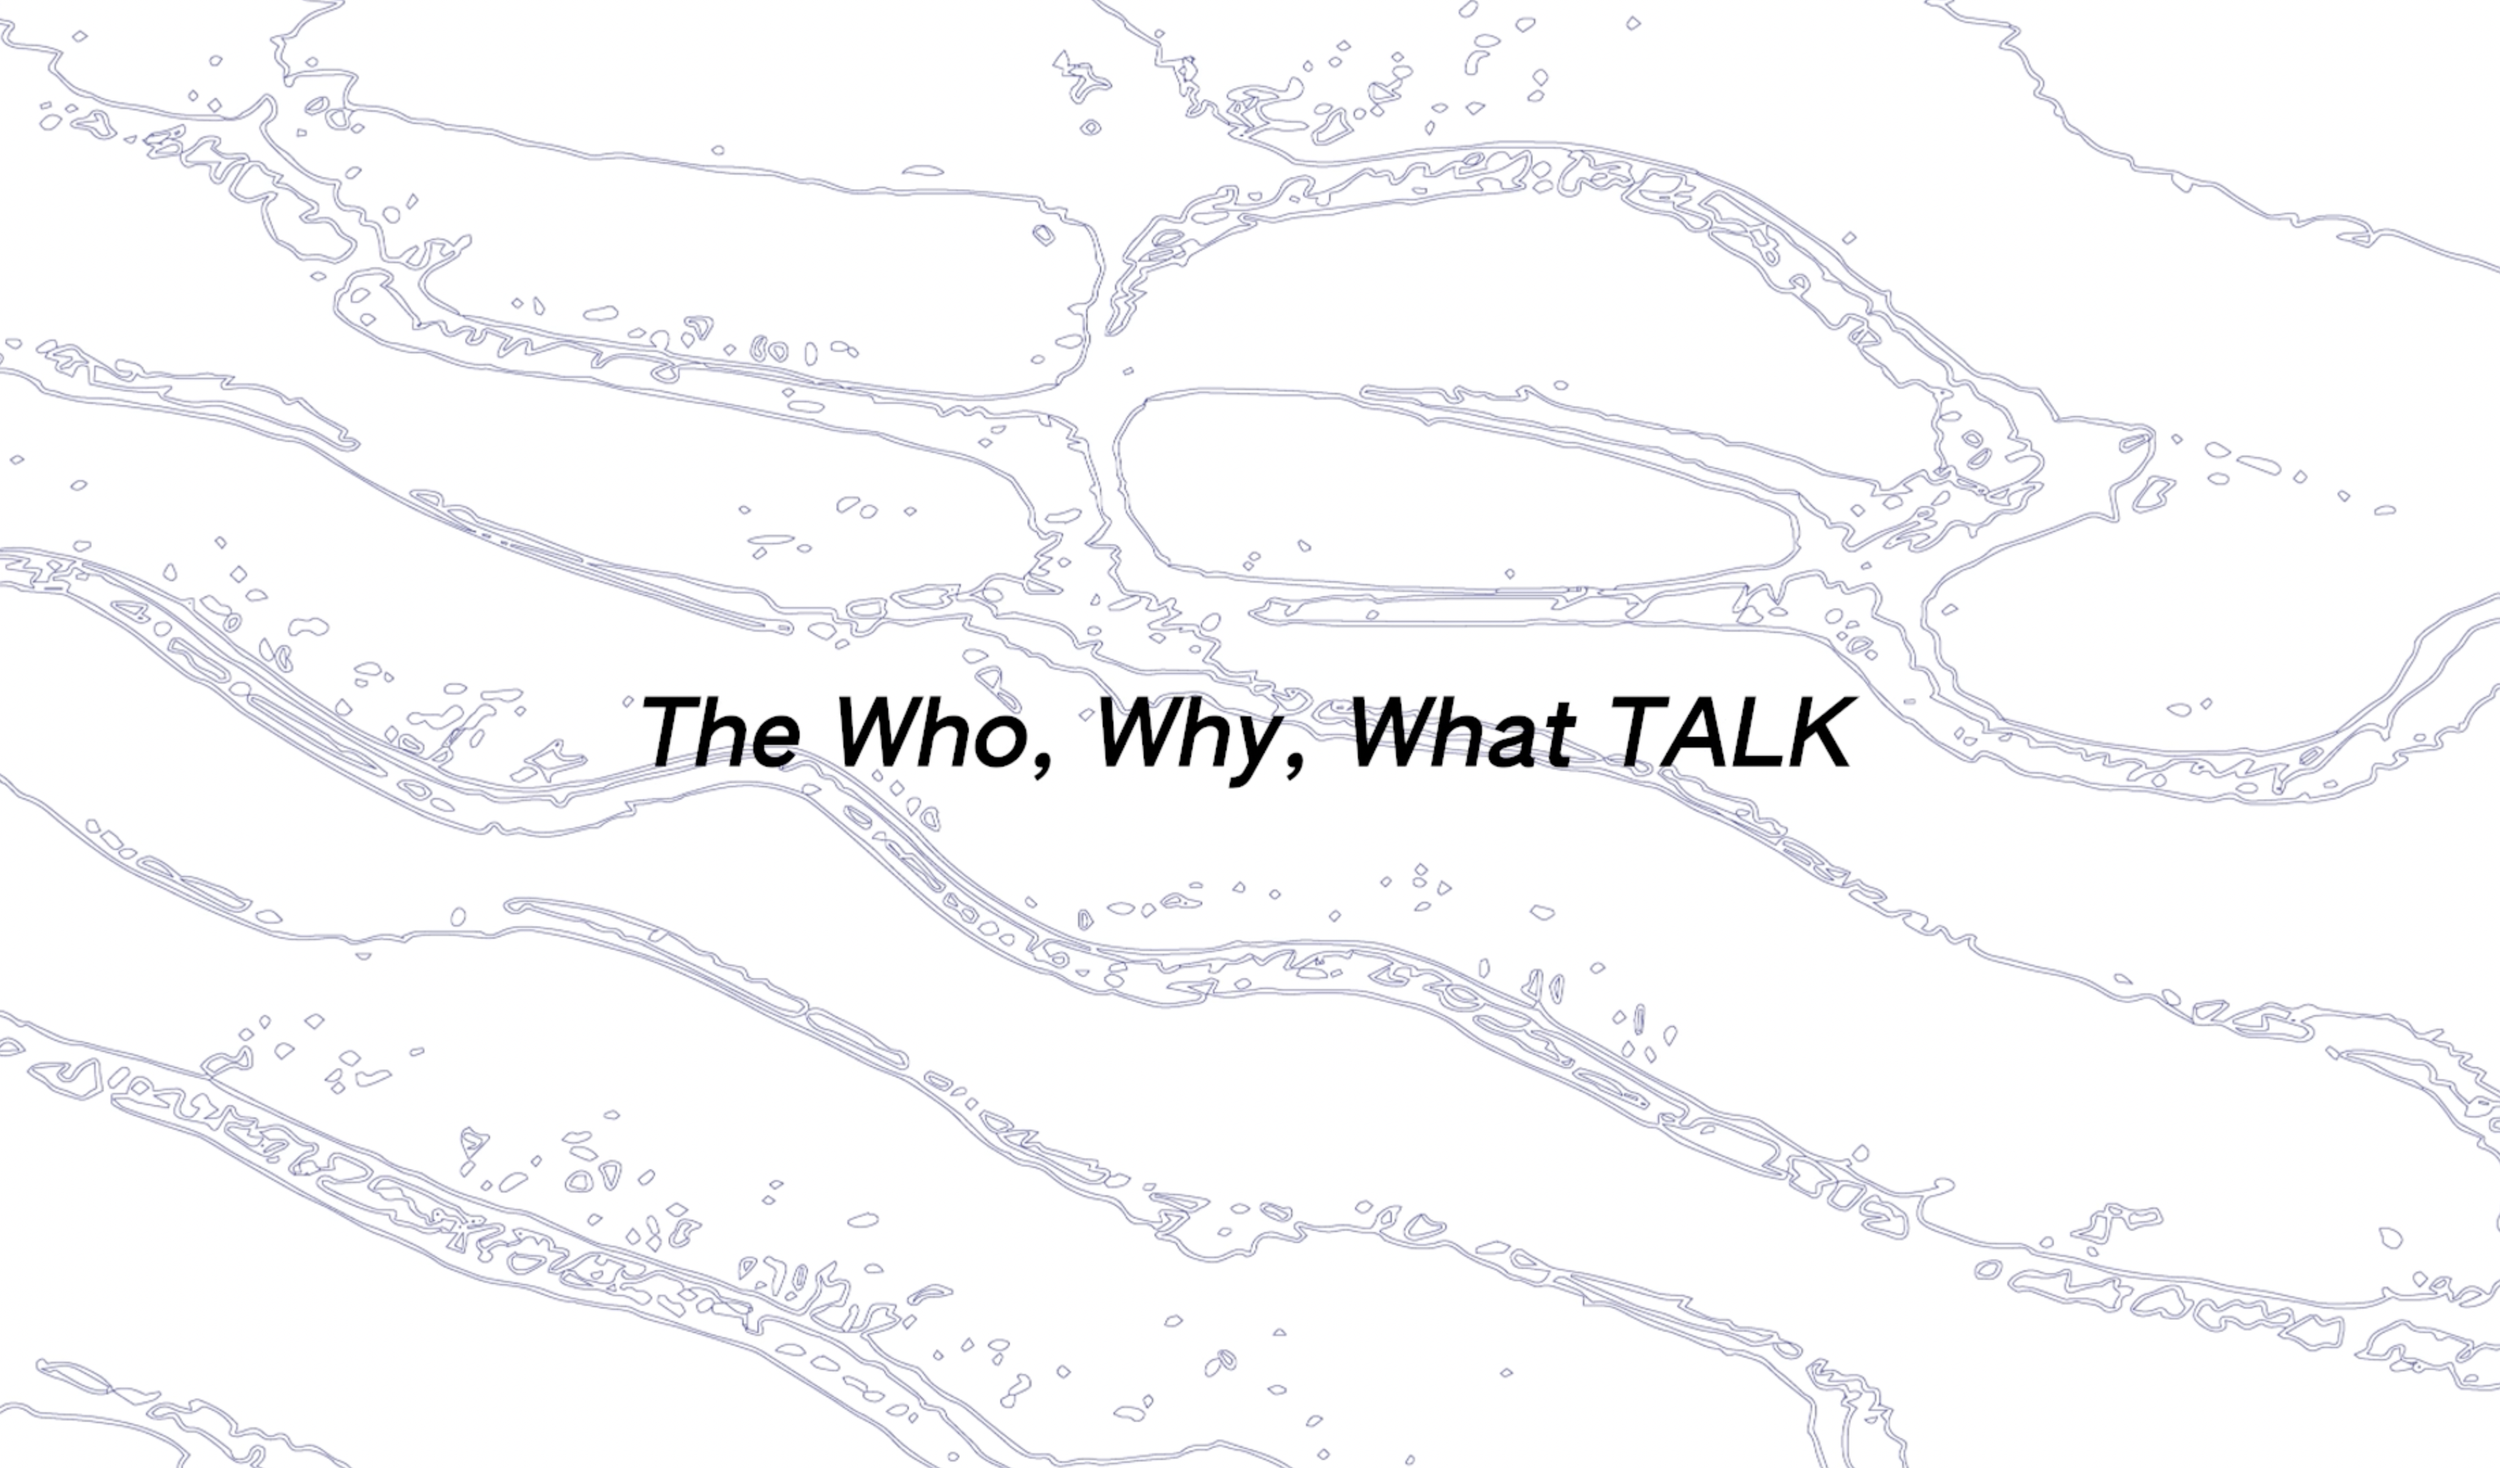 The Who, Why, What TALK